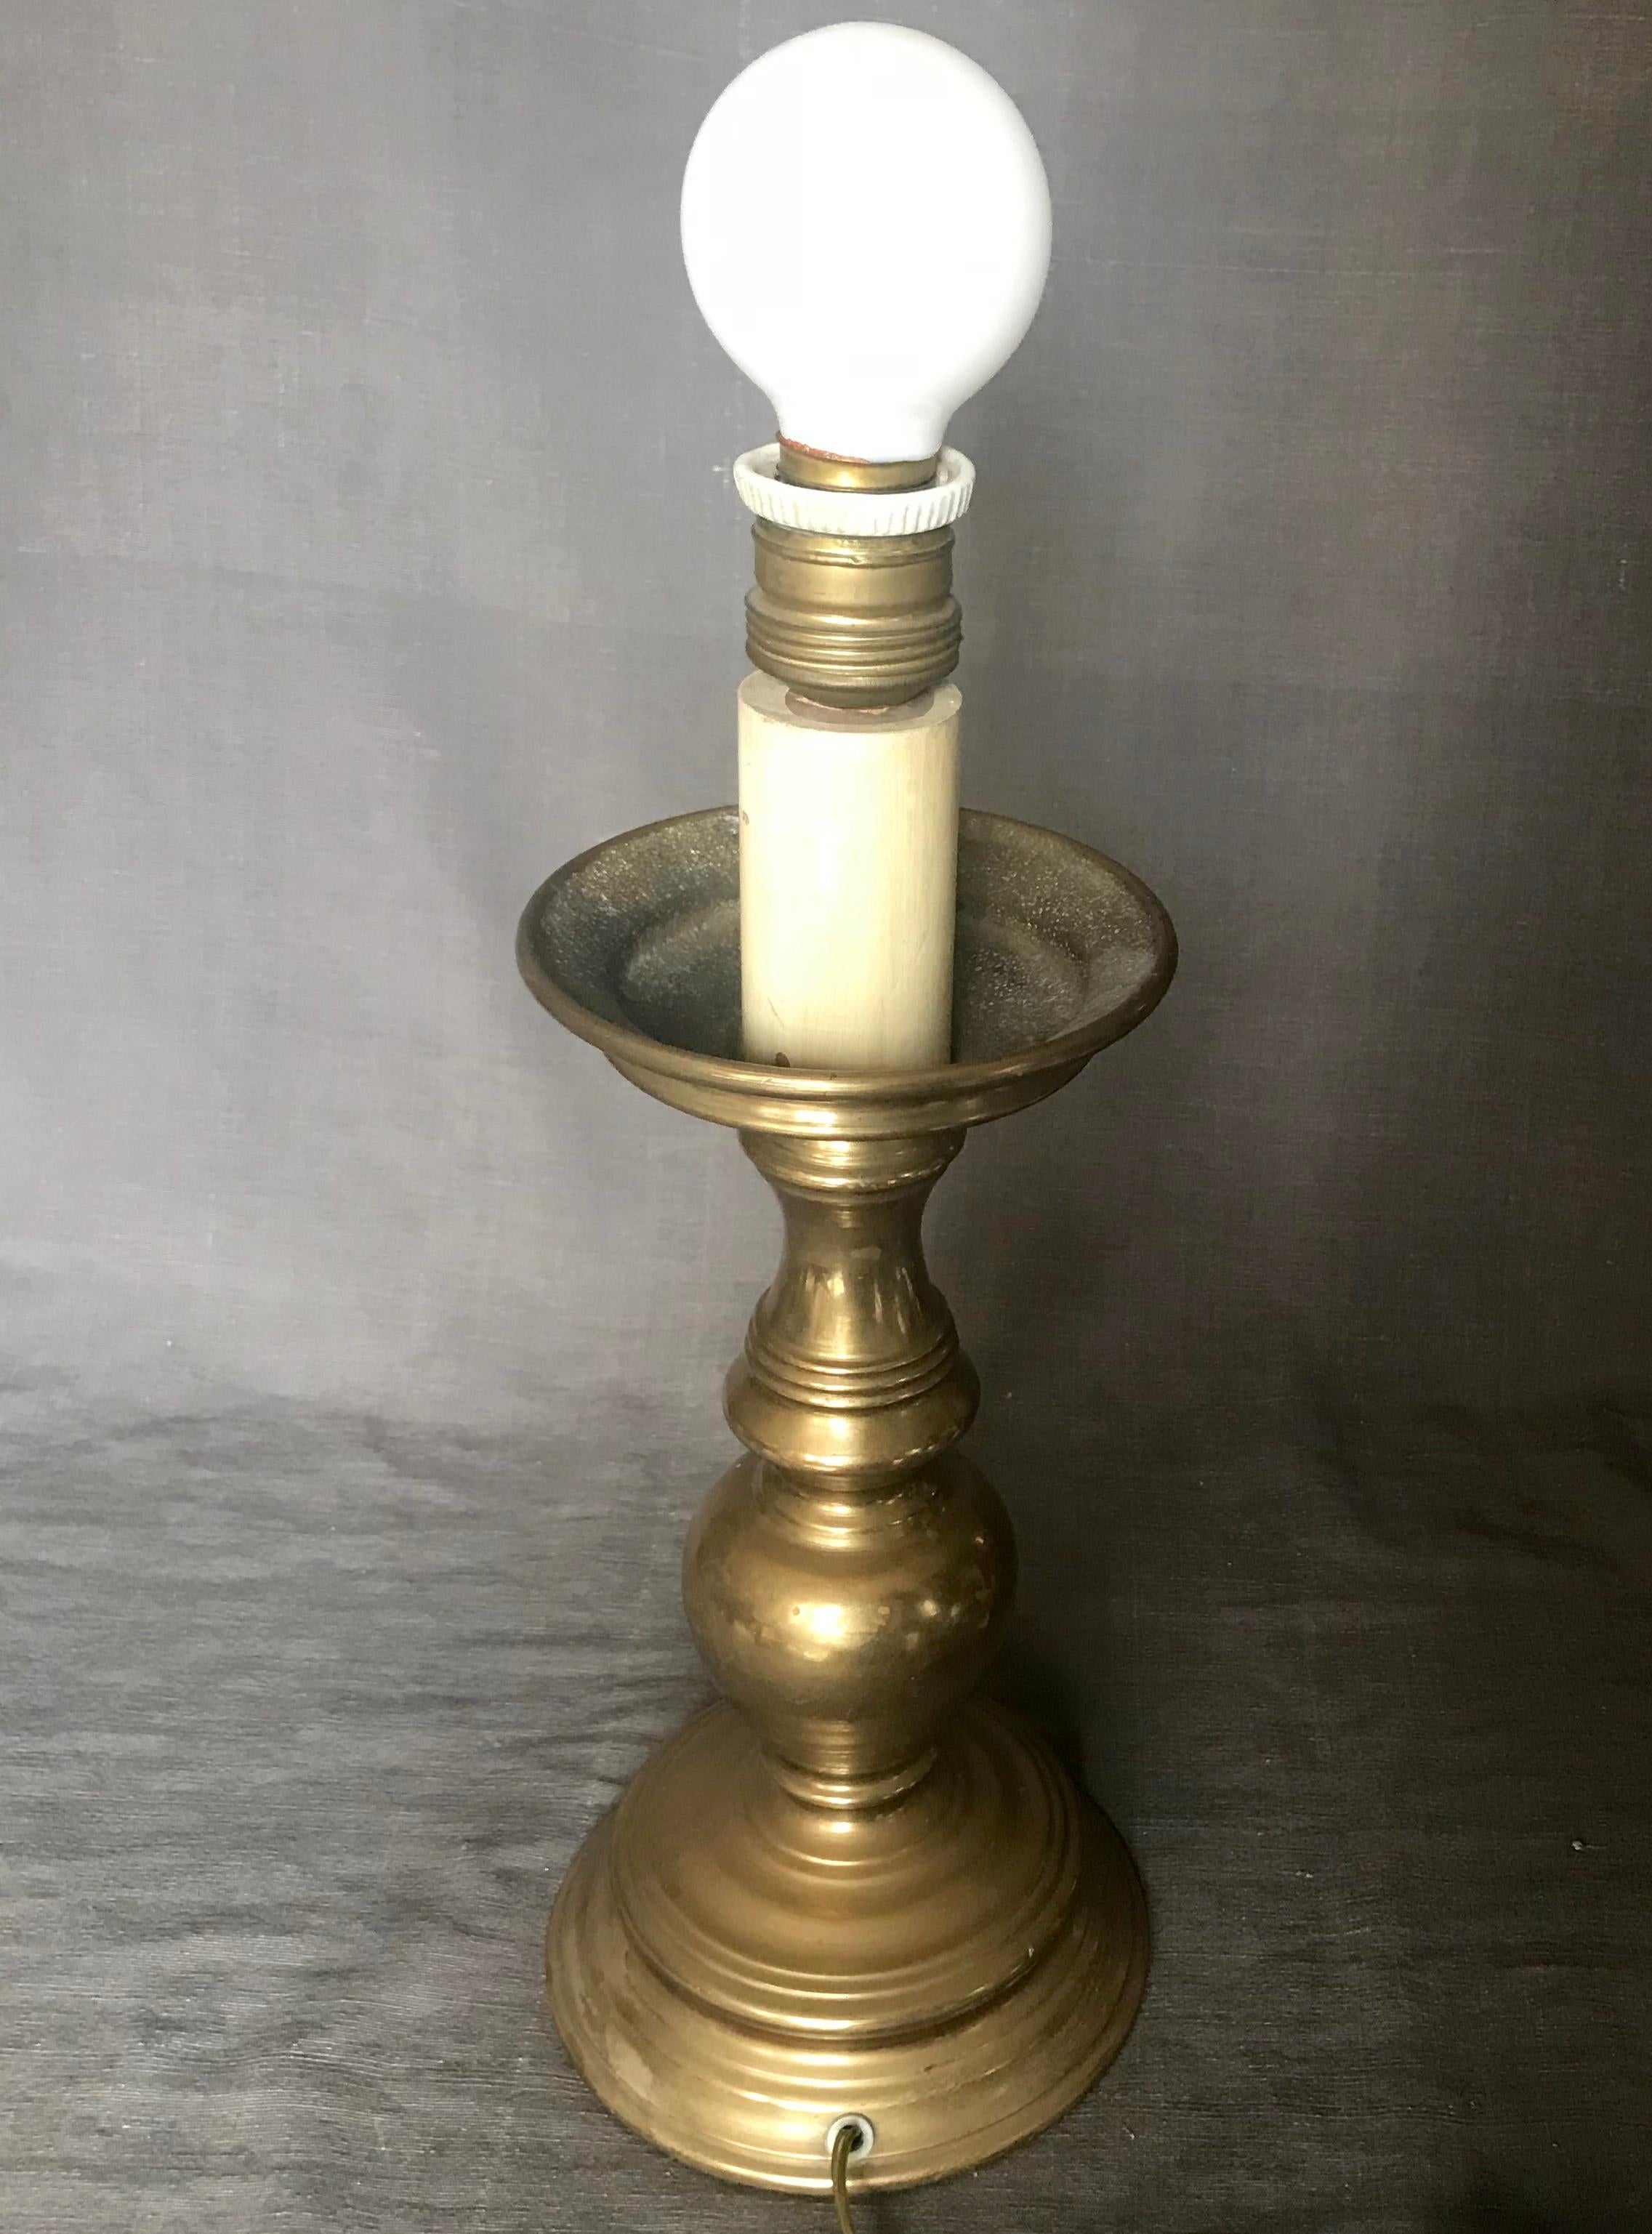 Italian brass reading lamp. Vintage Italian hotel candlestick form lamp for bedside table or desk in original brass patina, newly rewired with cord switch and original vendor’s label from Piazza S.Marco in Venice. Italy , circa 1940.
Dimensions: